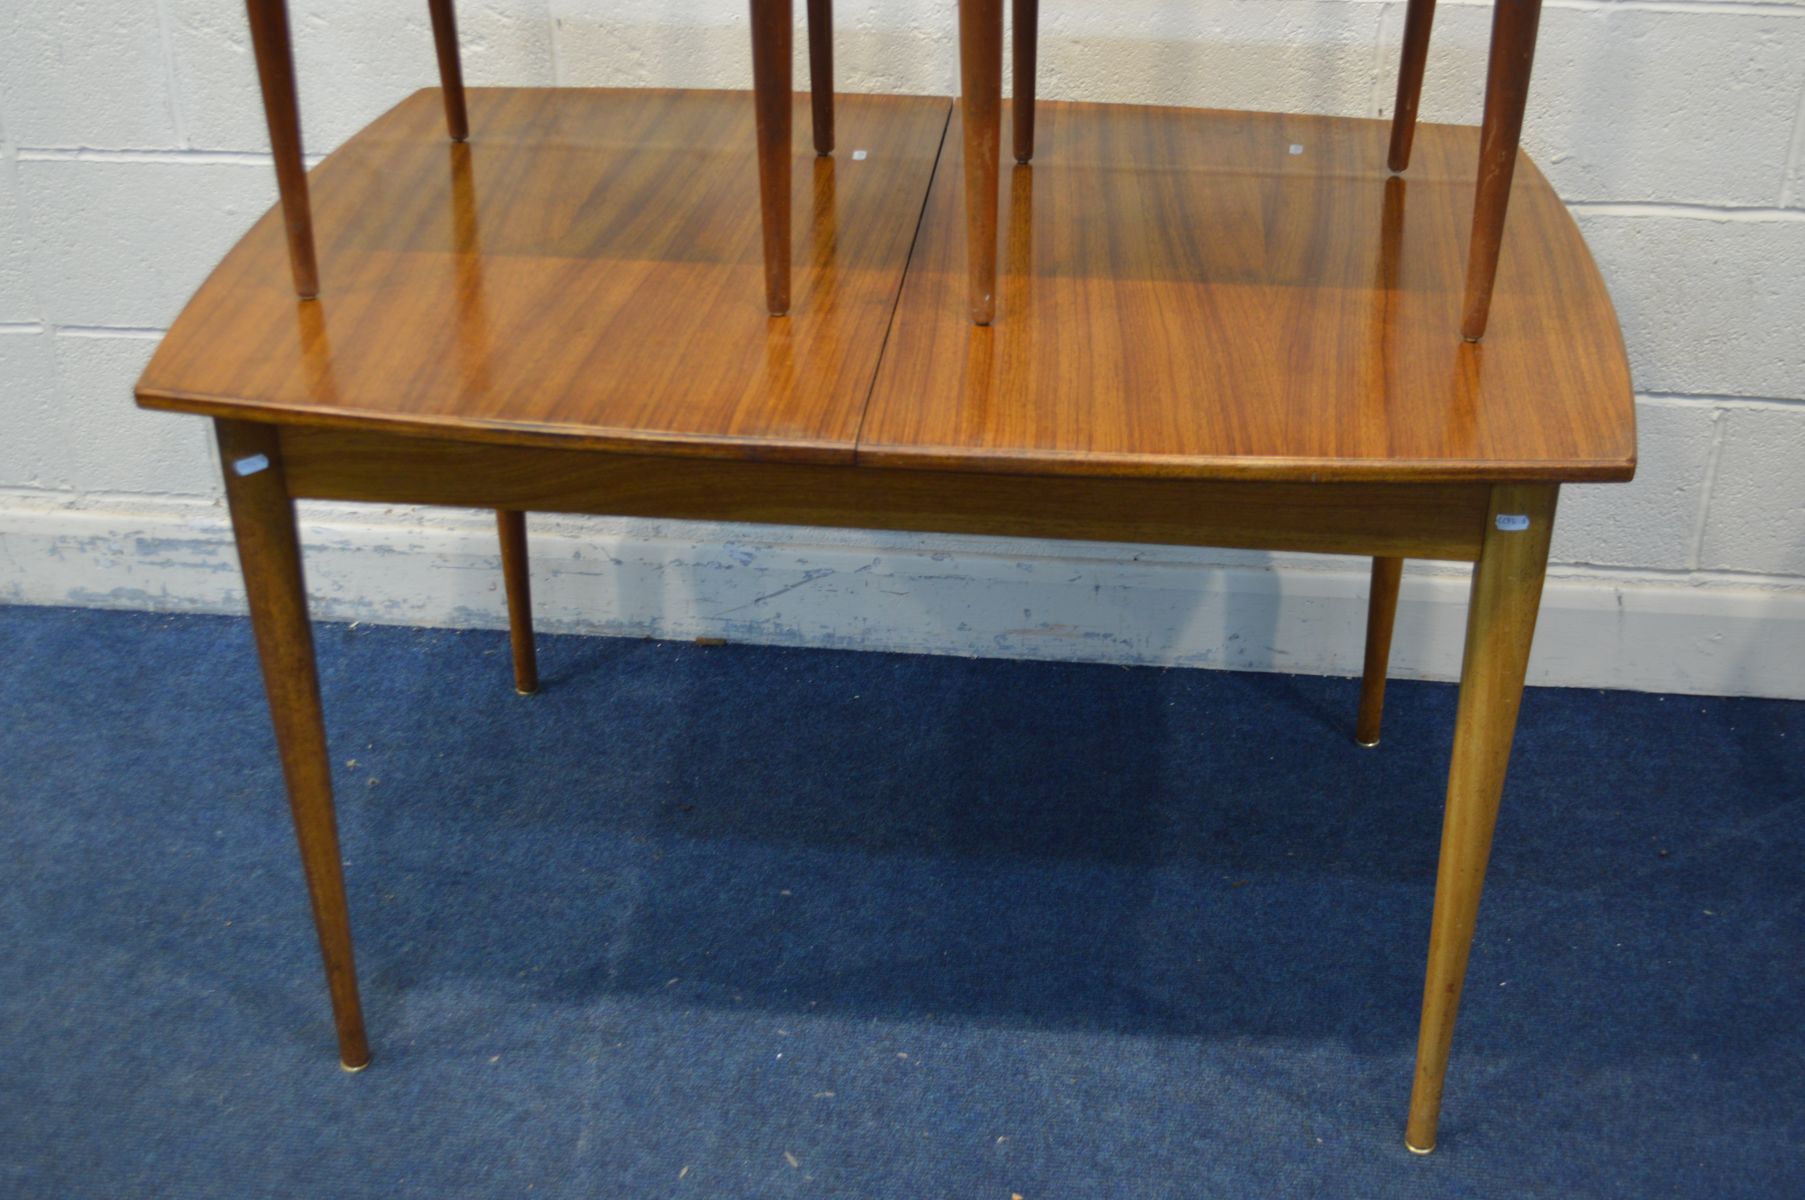 A 1950'S/60'S AFROMOSIA EXTENDING TABLE, with a single additional fold out leaf, extended length - Image 3 of 4